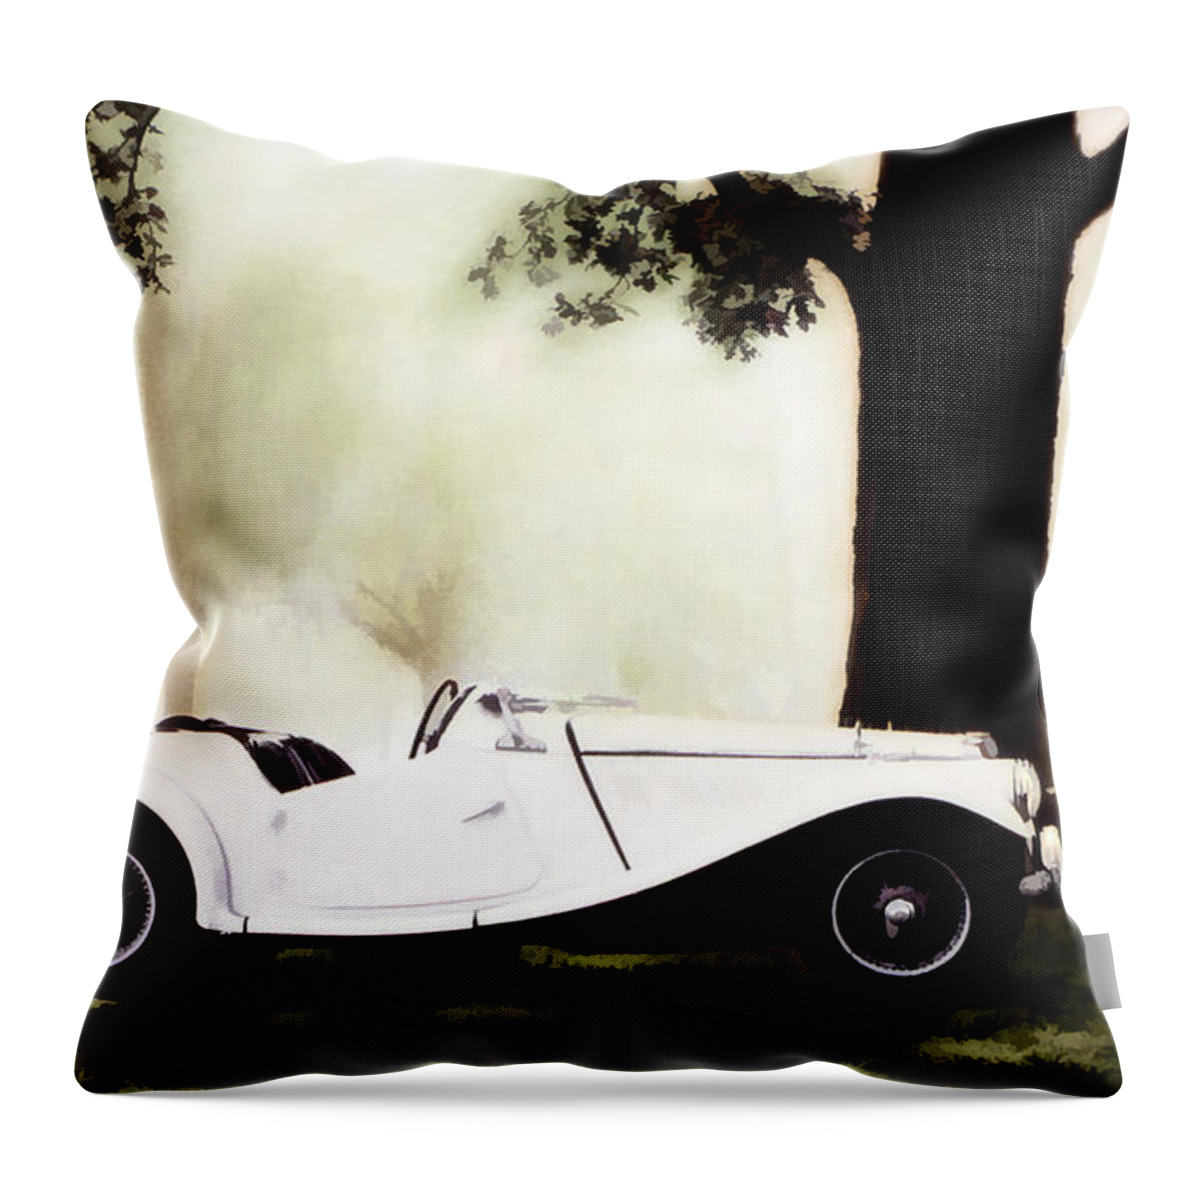 Historic Throw Pillow featuring the photograph Rest Stop by Sam Davis Johnson